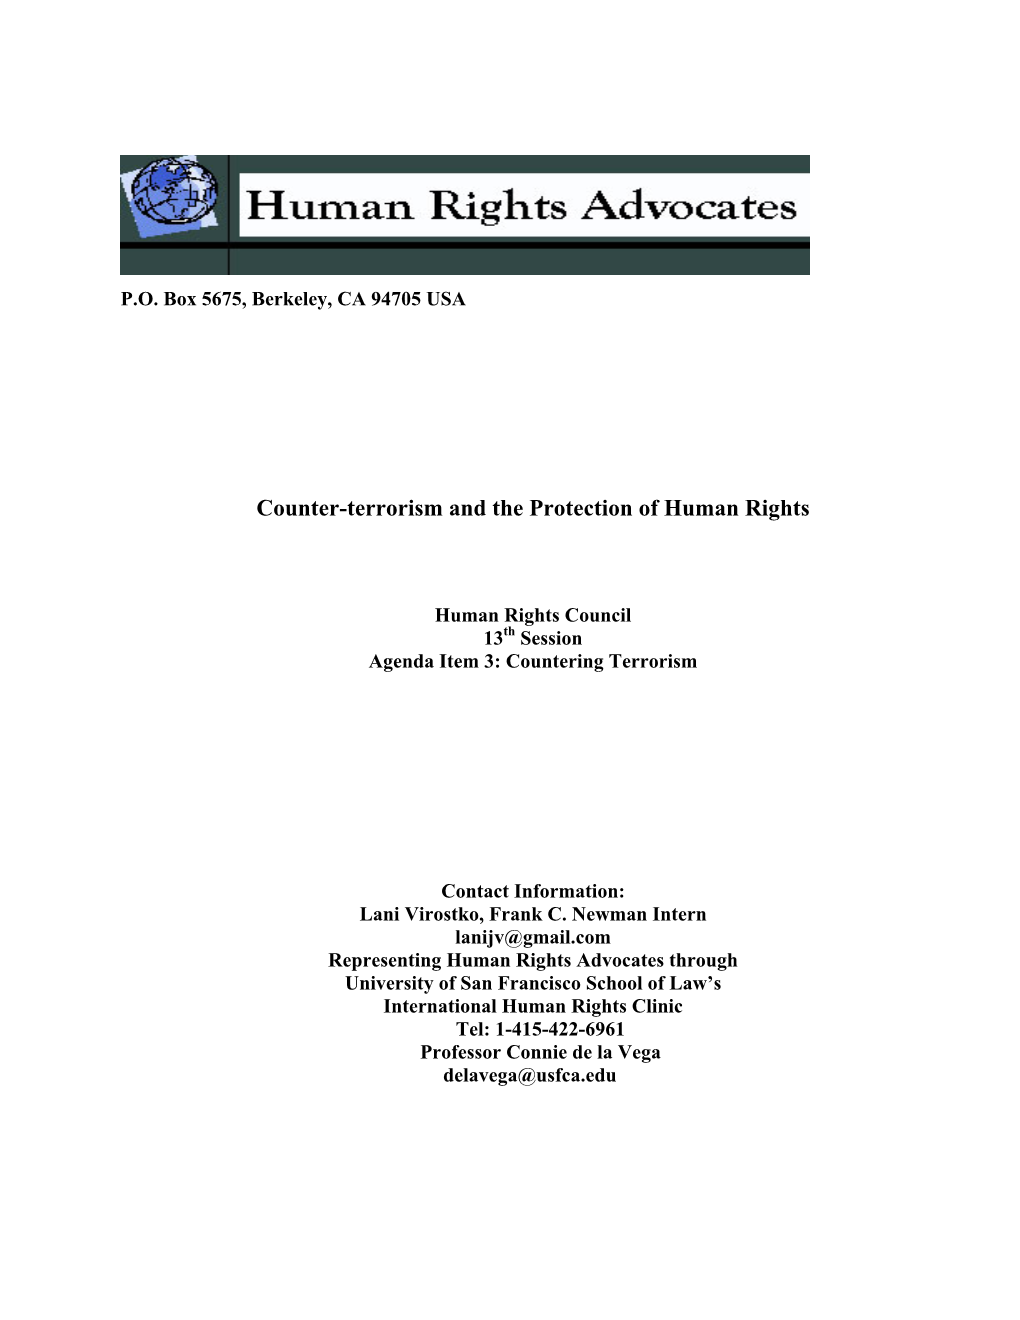 Counter-Terrorism and the Protection of Human Rights